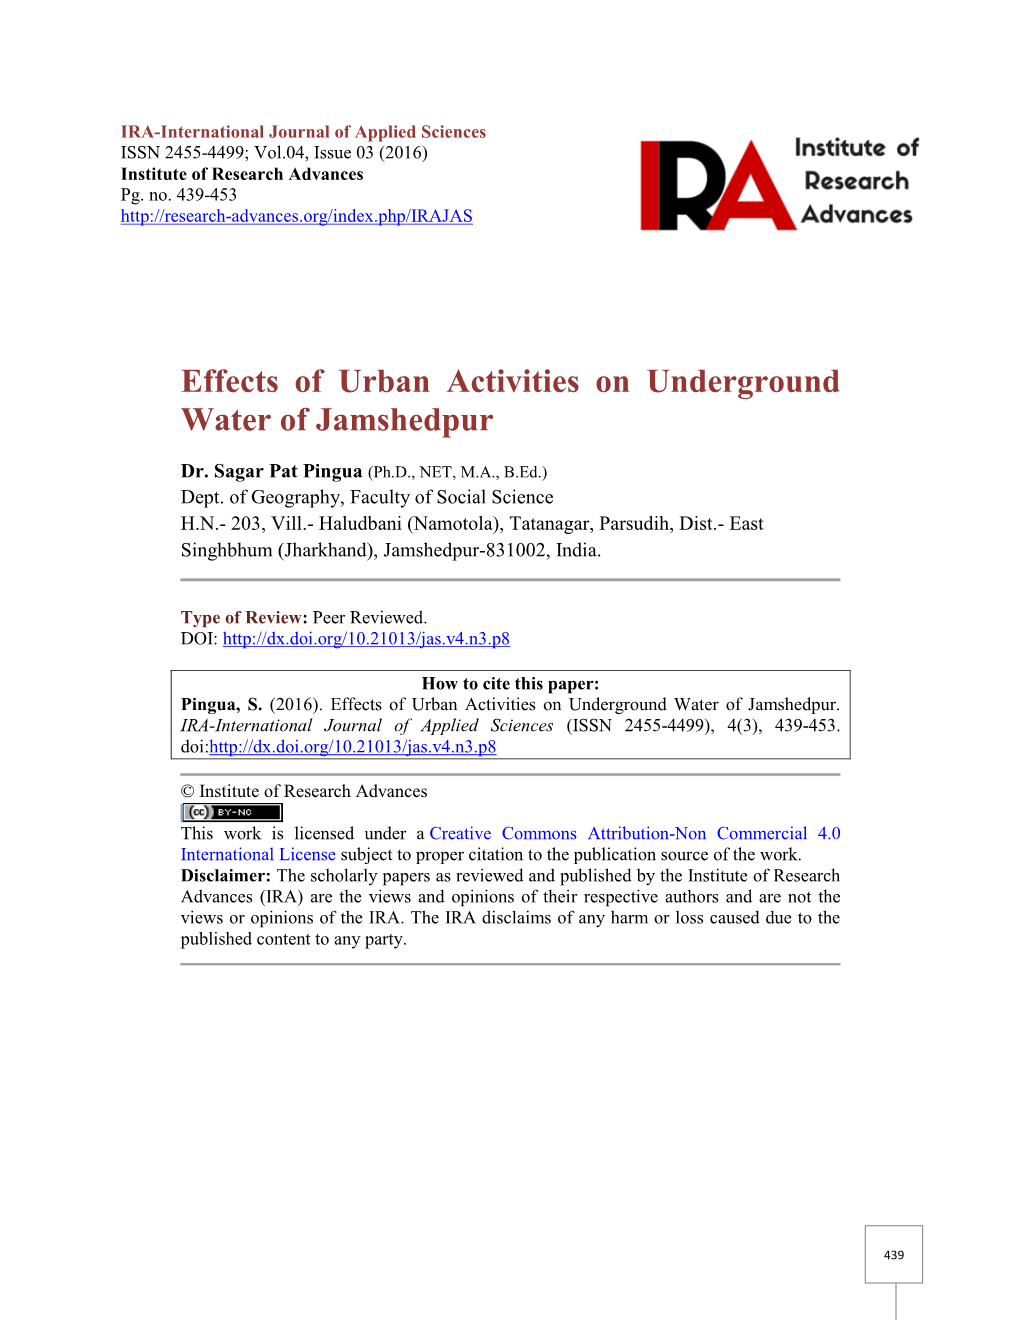 Effects of Urban Activities on Underground Water of Jamshedpur